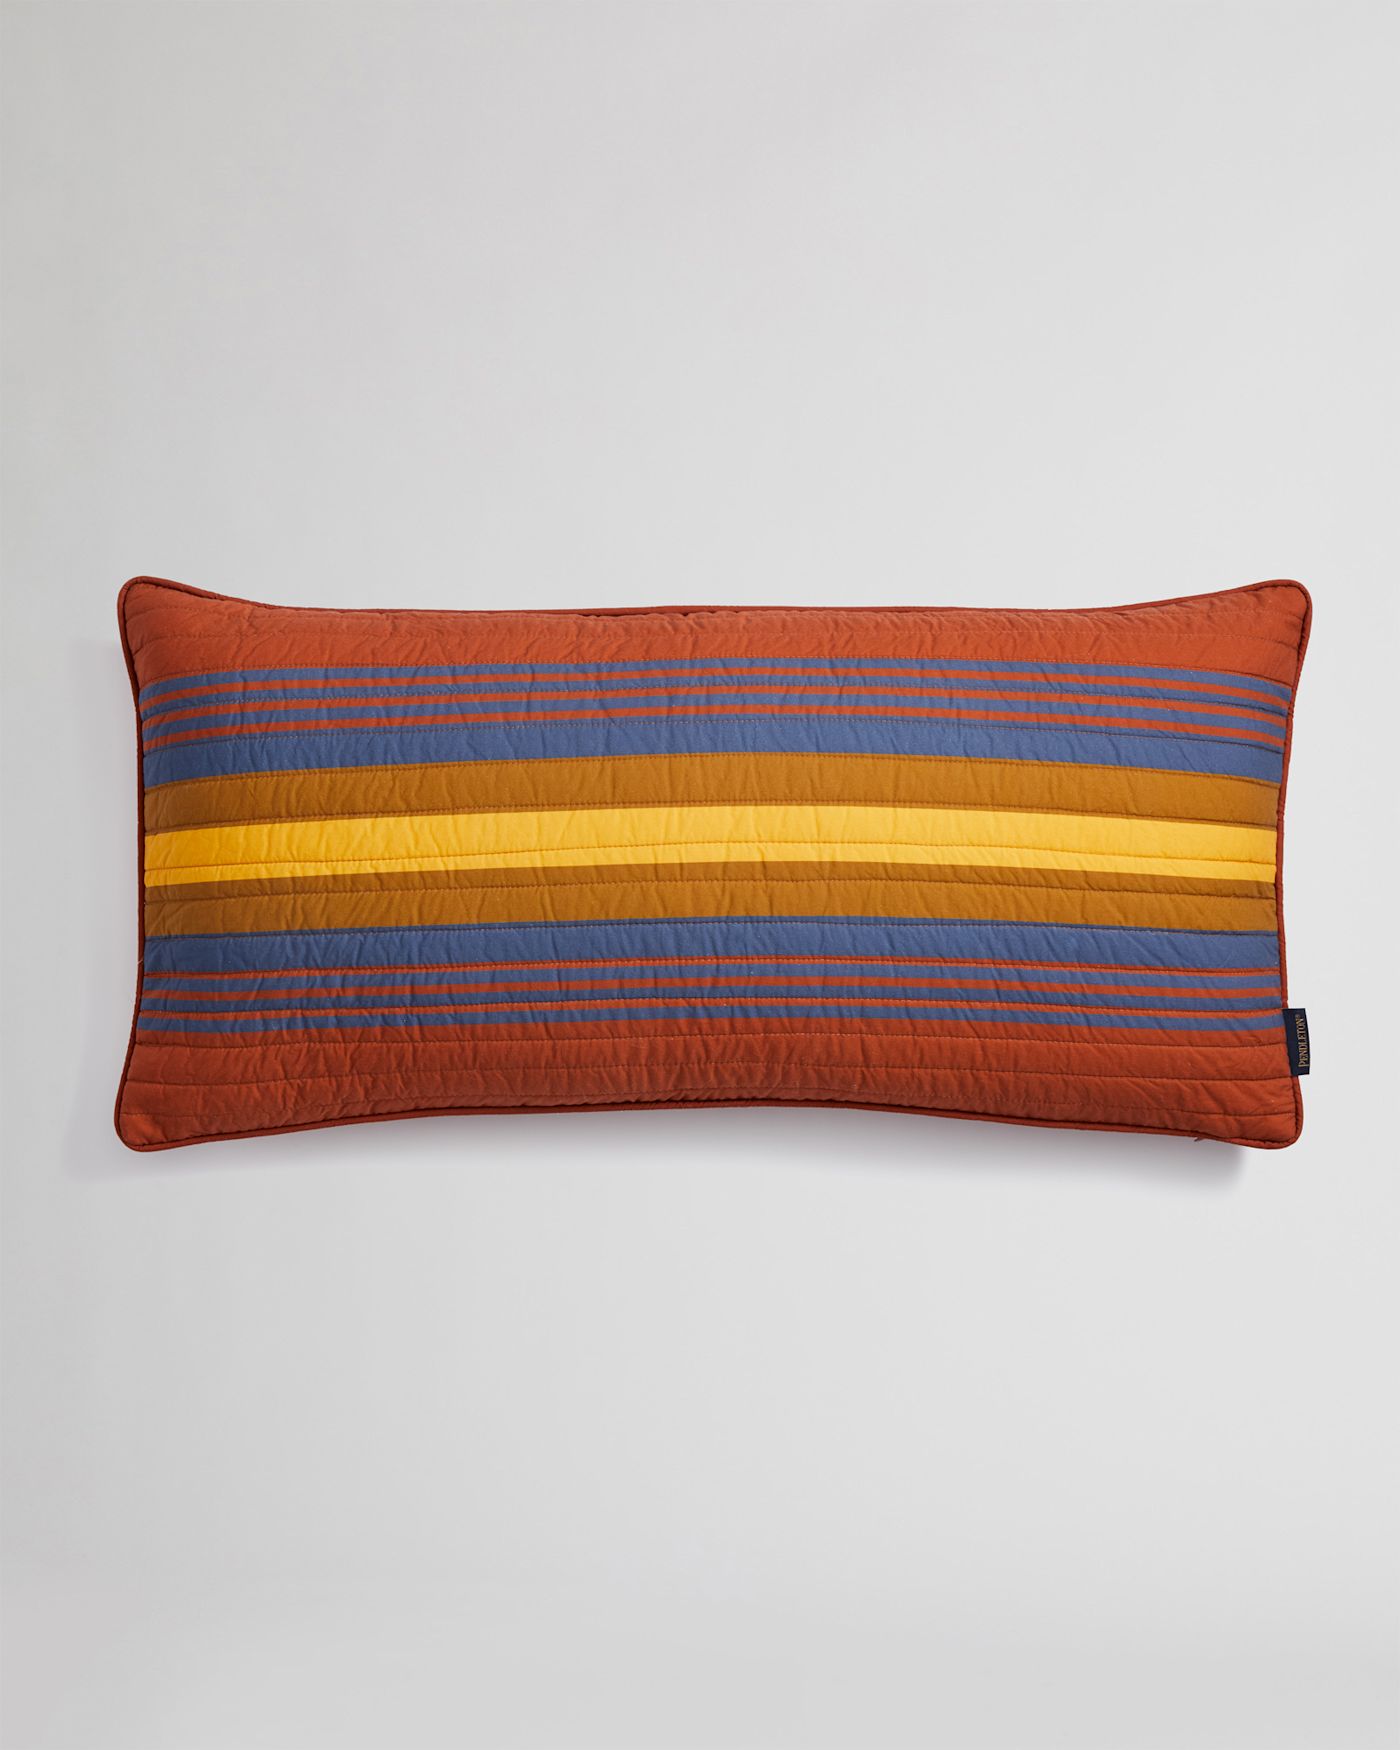 ZION NATIONAL PARK QUILTED HUG PILLOW